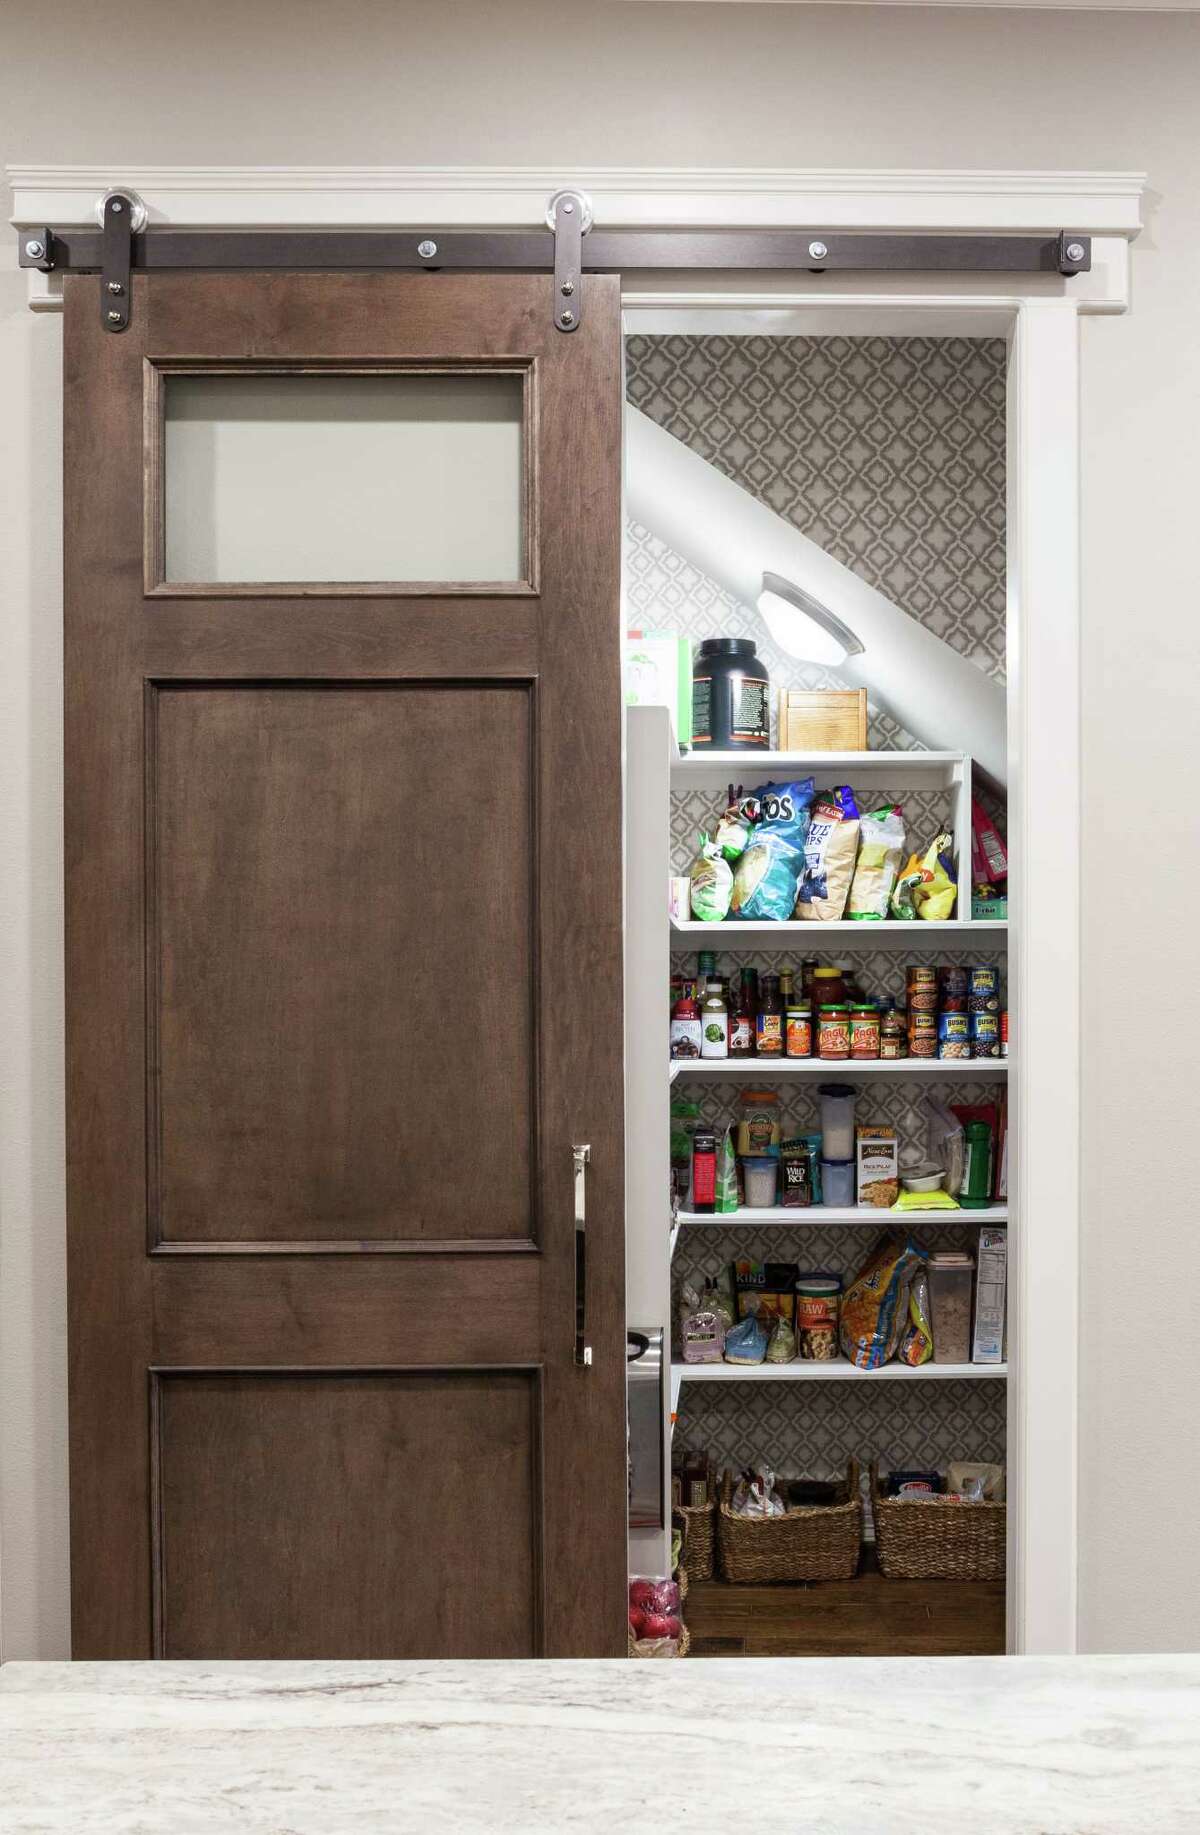 Super pantries: Making the most out of kitchen storage space